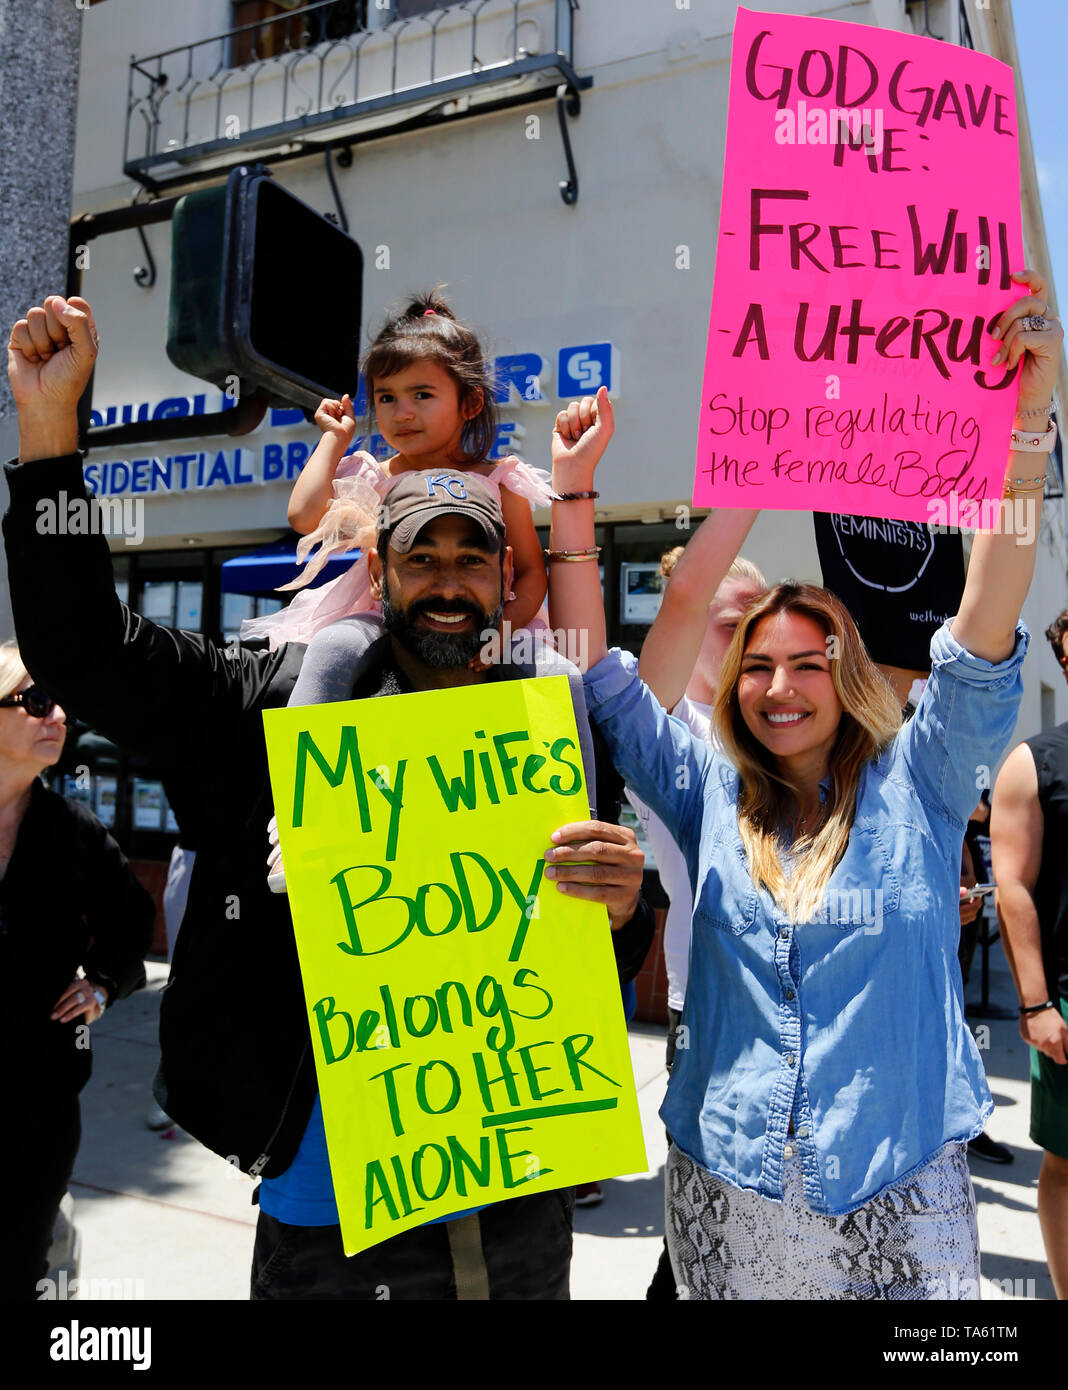 Los Angeles, USA. 21st May, 2019. People attend a rally in Los Angeles, the United States, on May 21, 2019. Dozens of rallies were held Tuesday in southern California's major cities to denounce the growing number of states passing restrictive abortion laws and demand women's rights in the contentious abortion issue. Credit: Li Ying/Xinhua/Alamy Live News Stock Photo